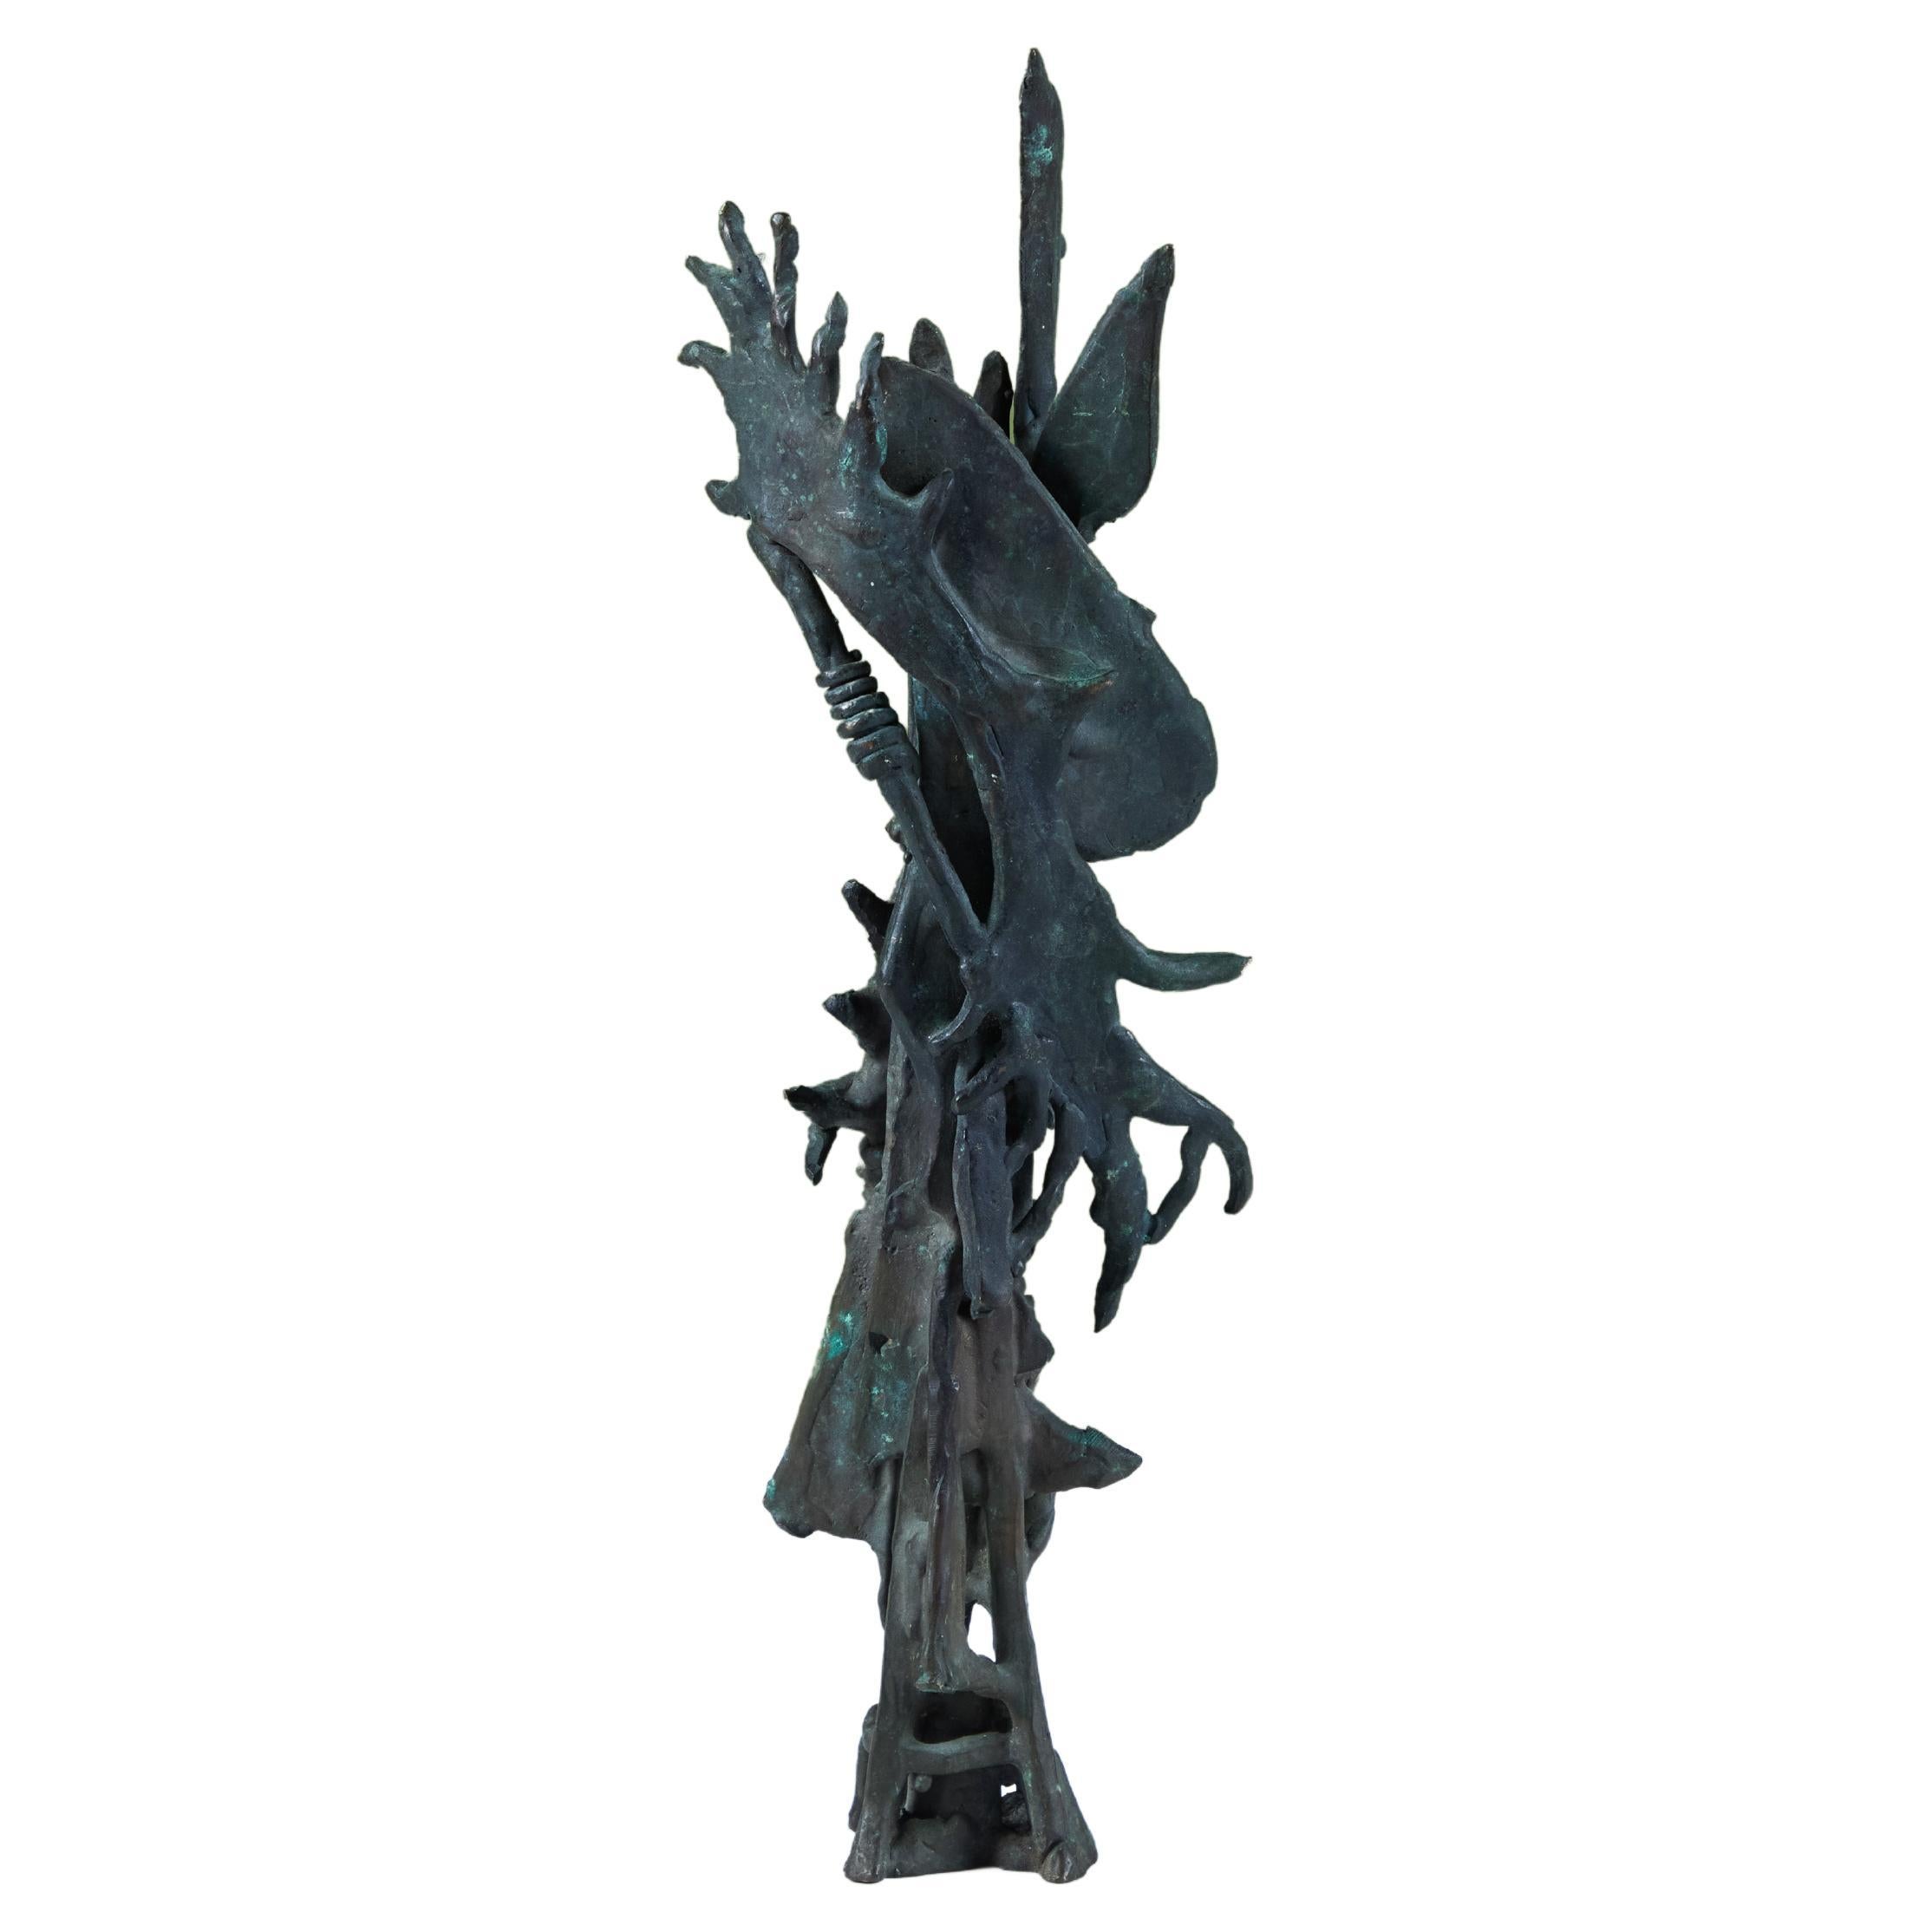 Cast Bronze Armory Tower Statuette by J. Dale M'Hall